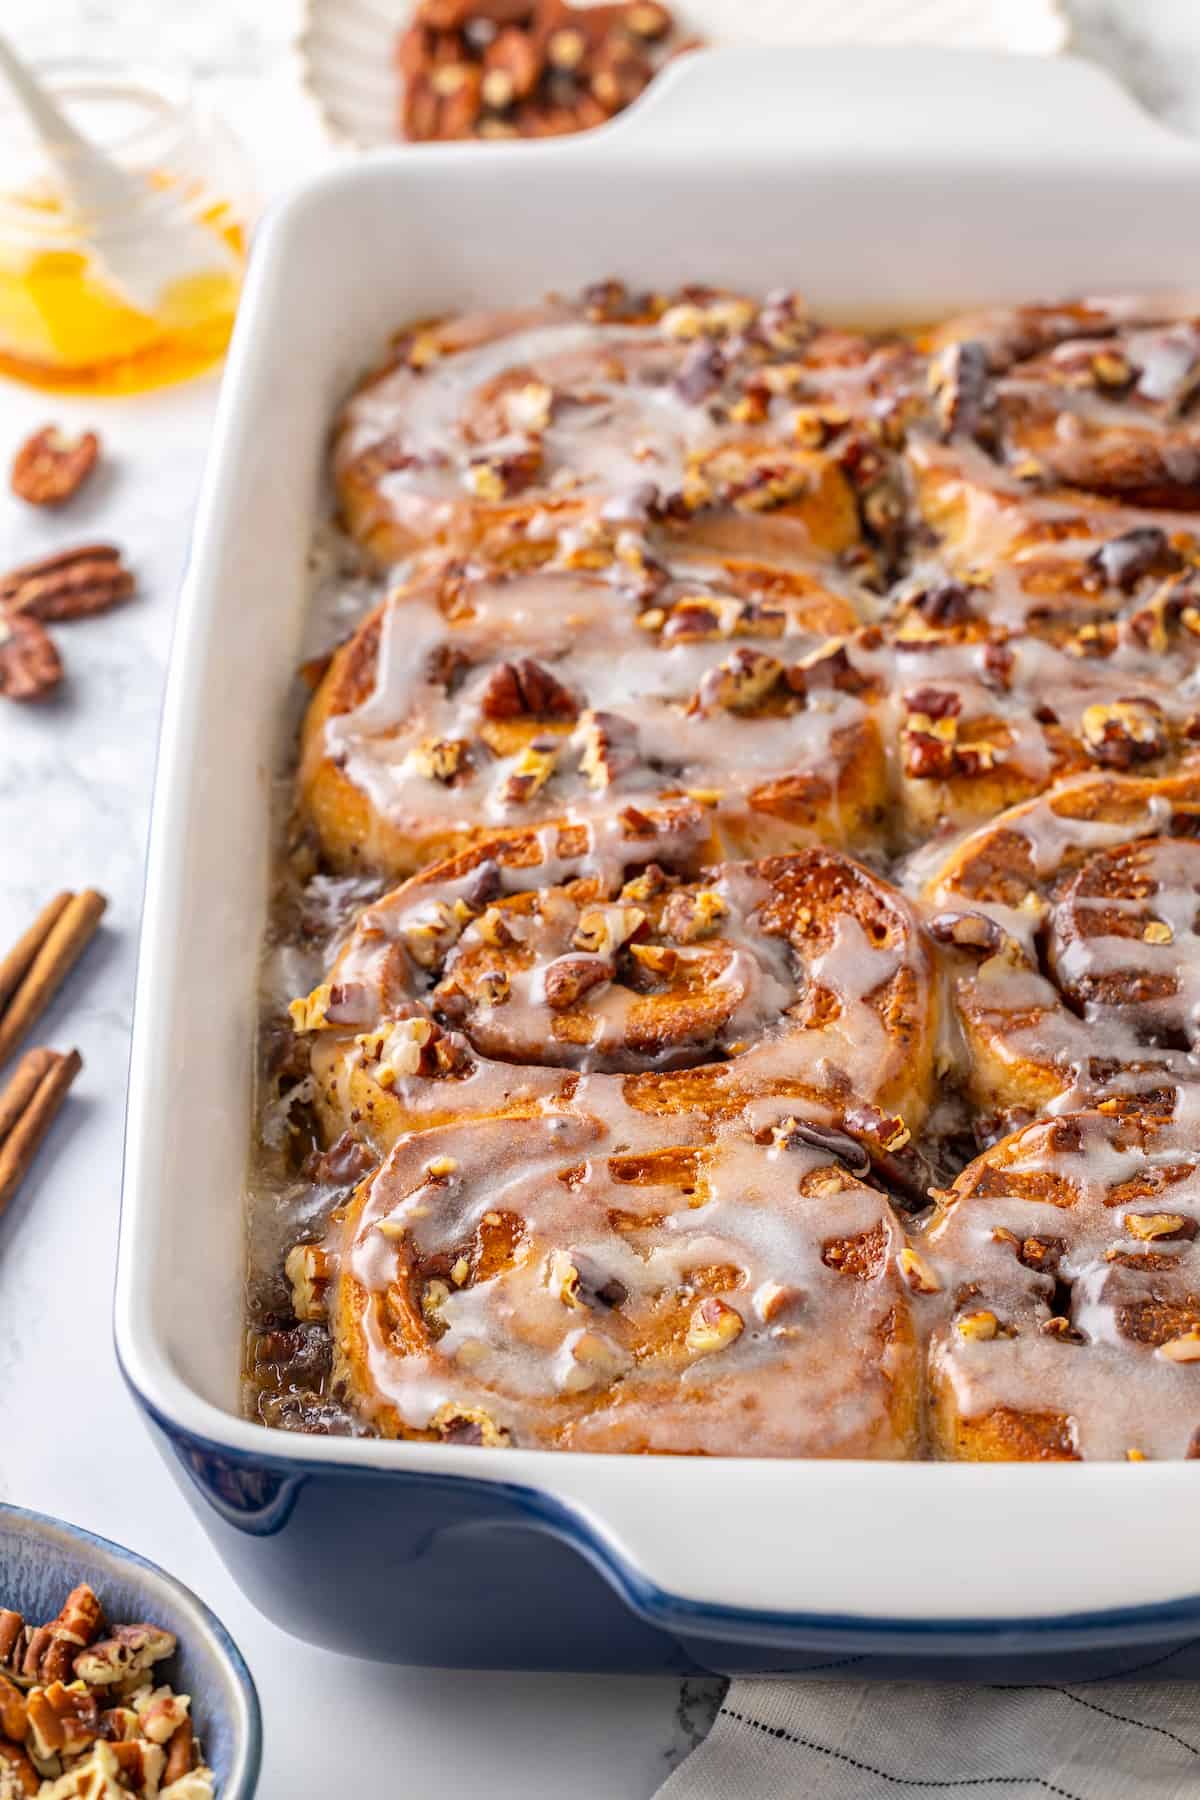 Baking dish of cinnamon roll French toast